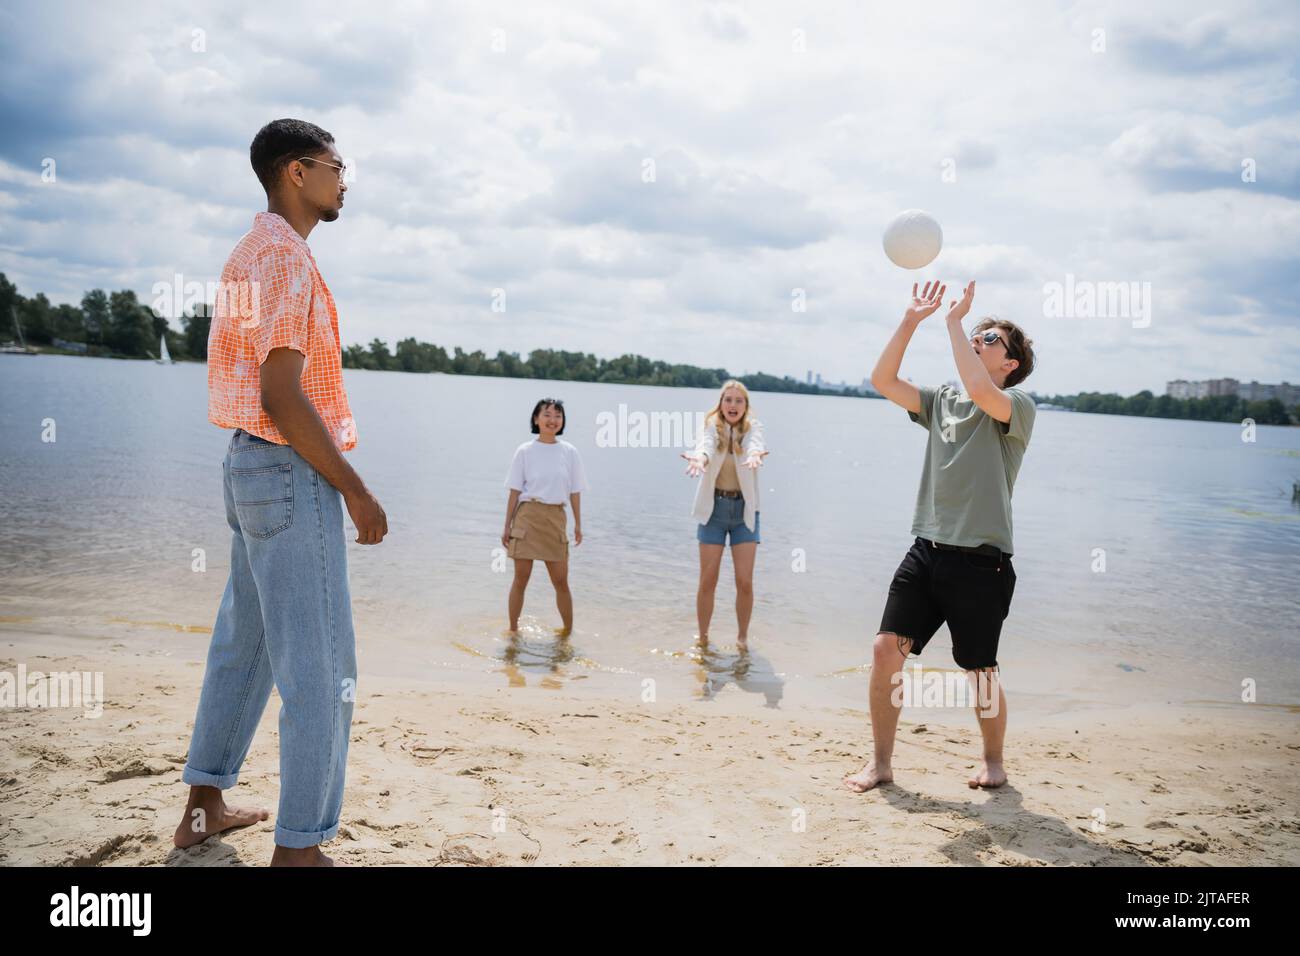 young man passing ball while playing beach volleyball with interracial friends Stock Photo